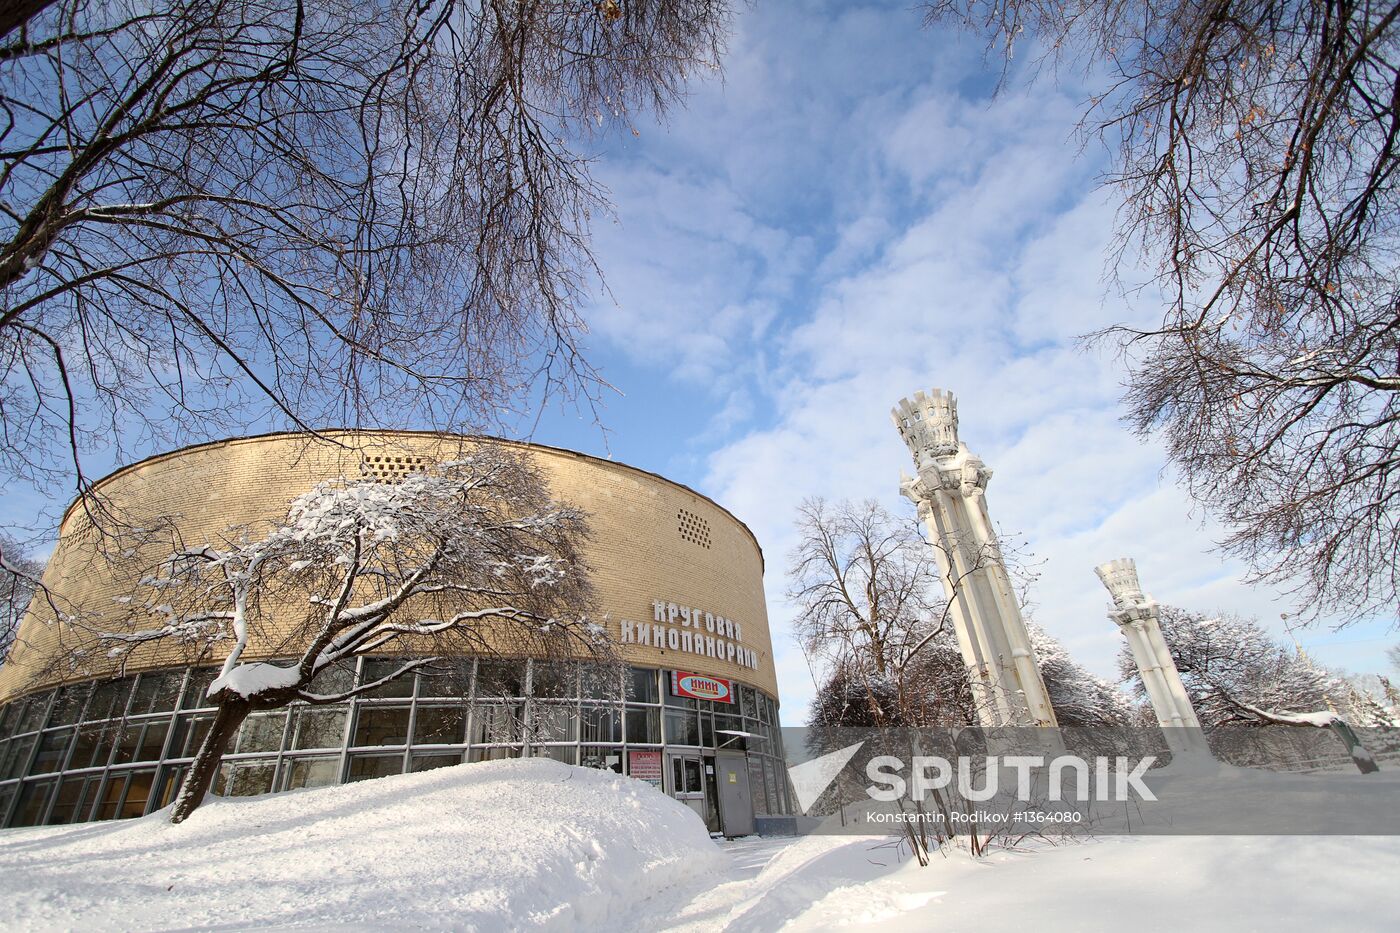 "Circular Cinema" film theater in Moscow